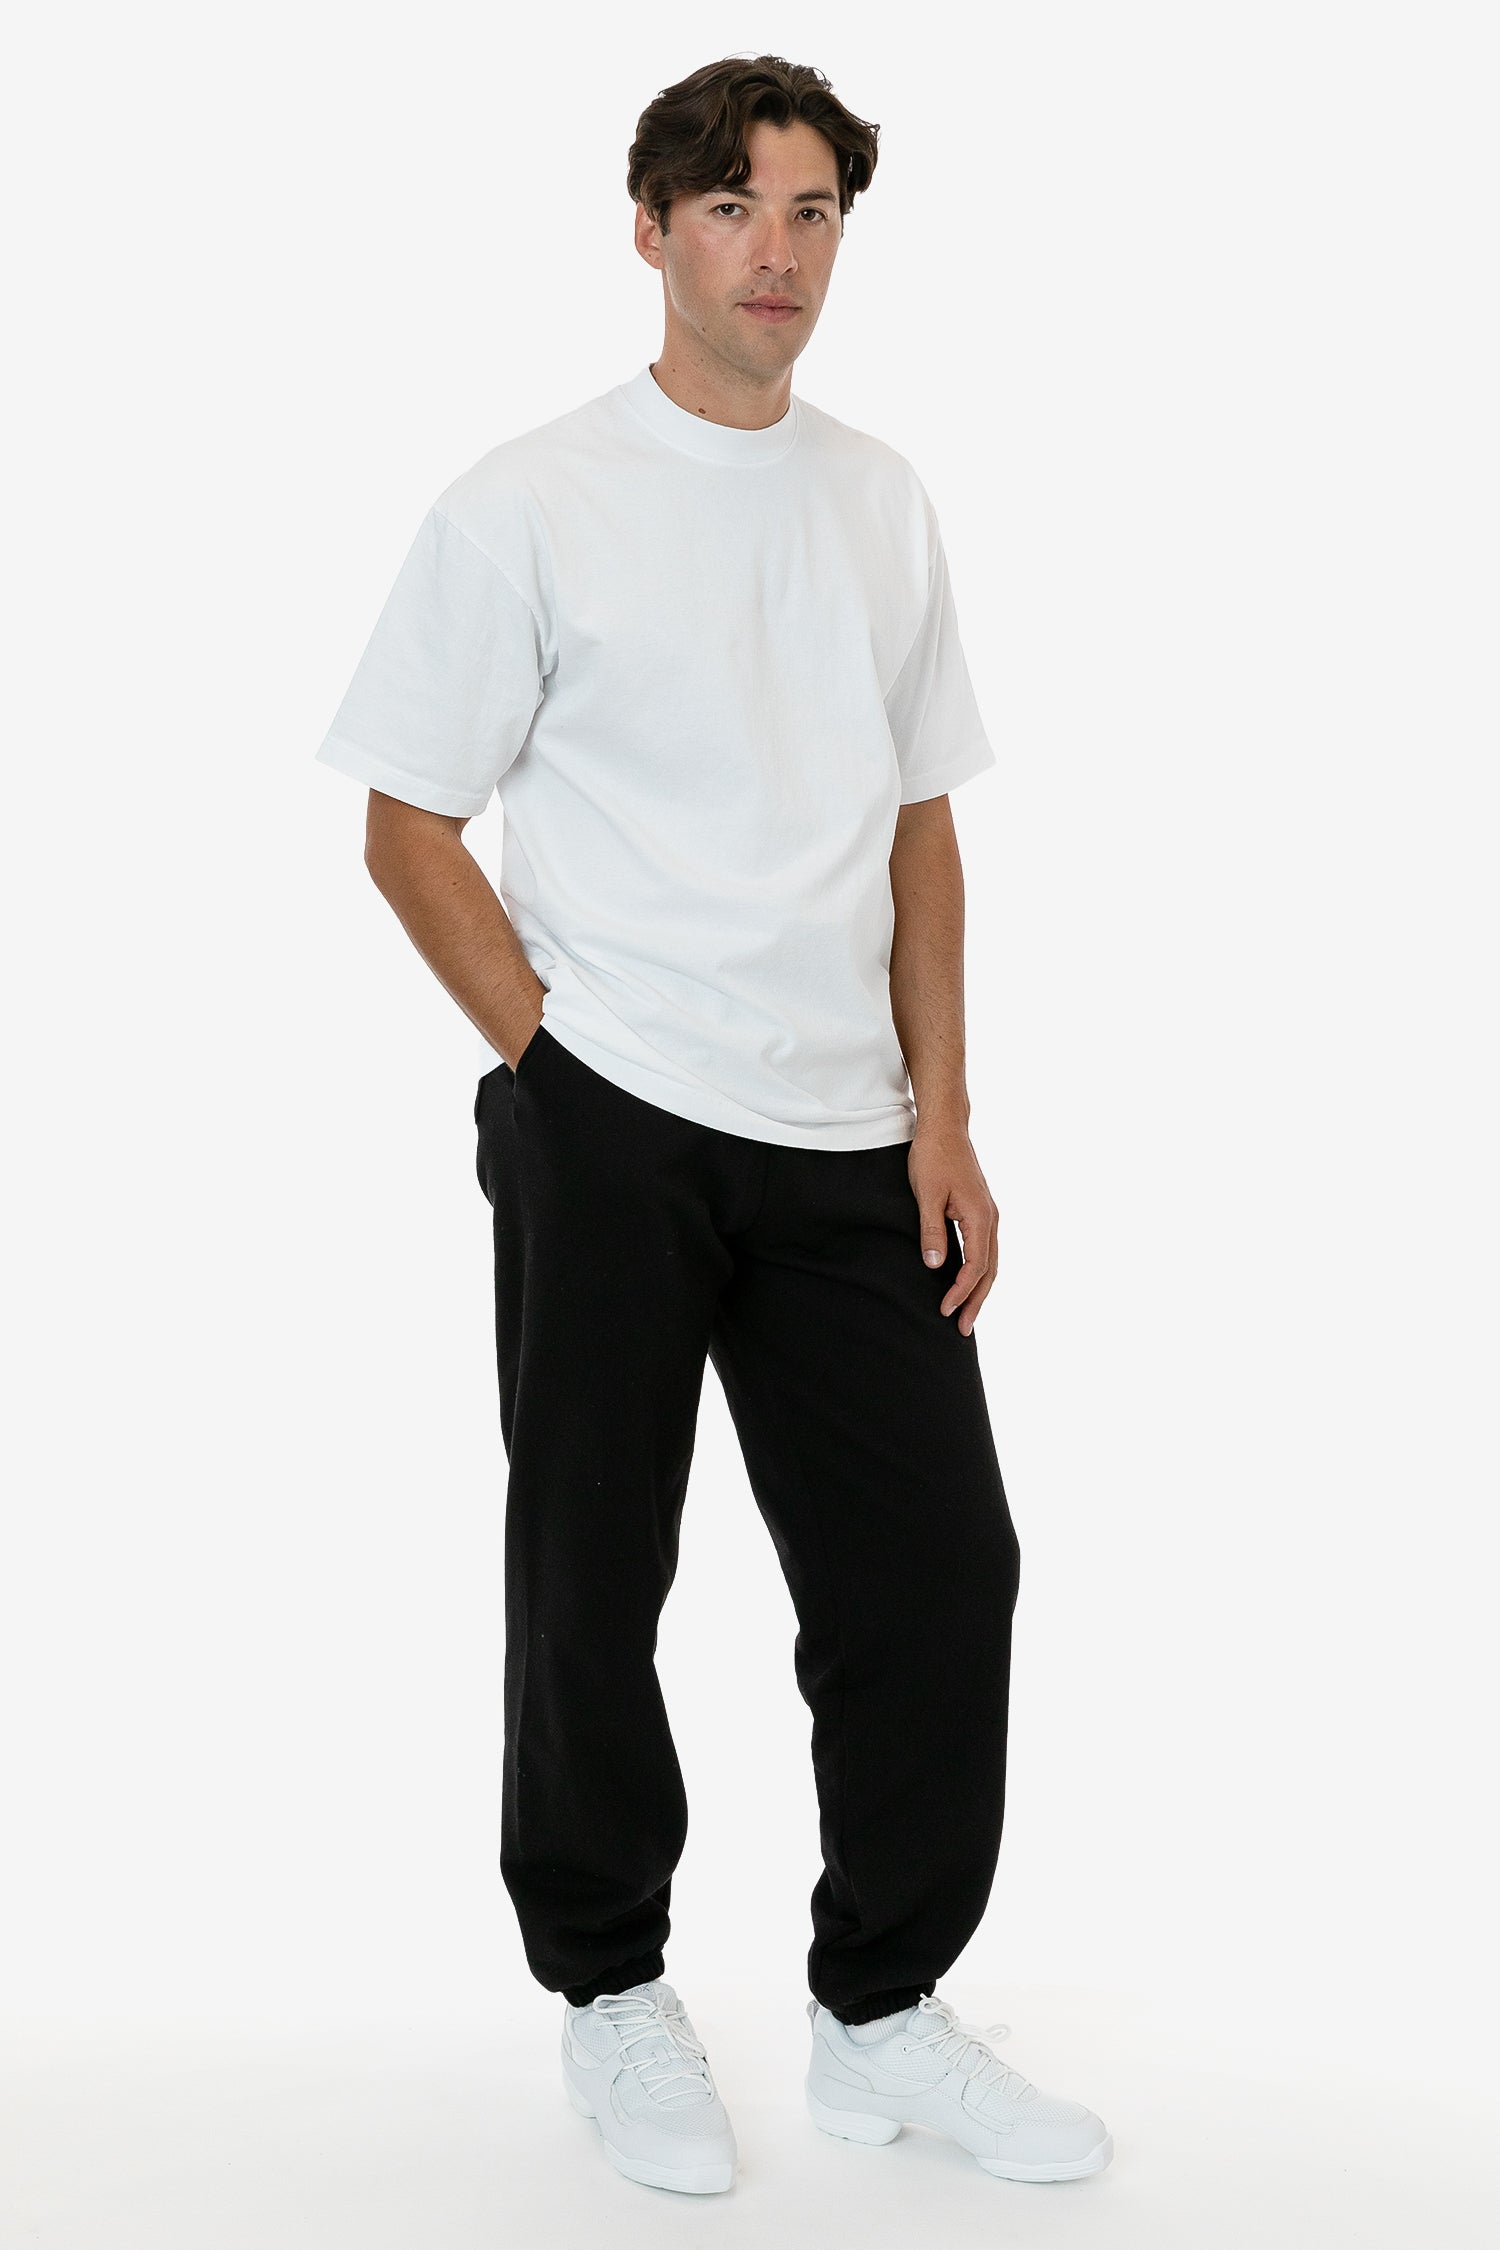 MWF1044 - 10 oz. Mid-Weight Poly Cotton Fleece Wide Sweatpant